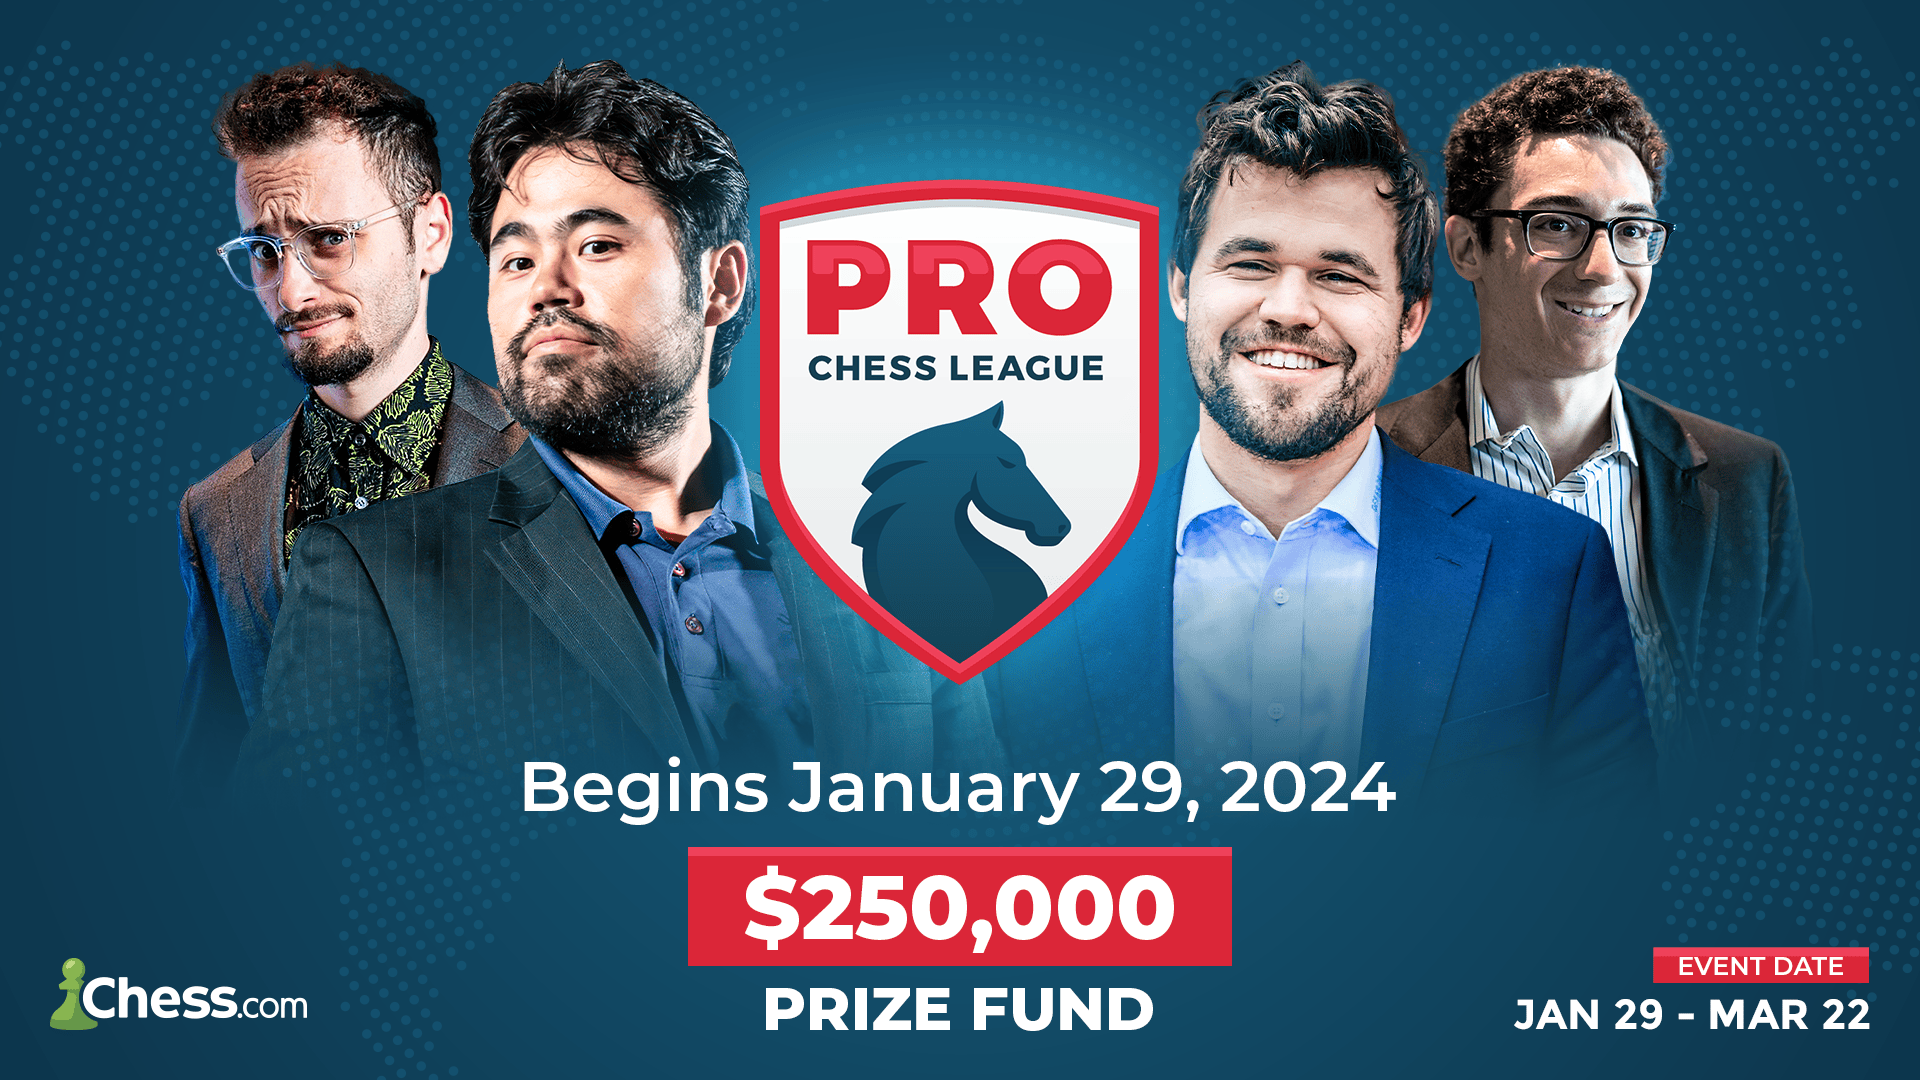 Pro Chess League 2024: Teams Gear Up To Fight For Biggest Prize